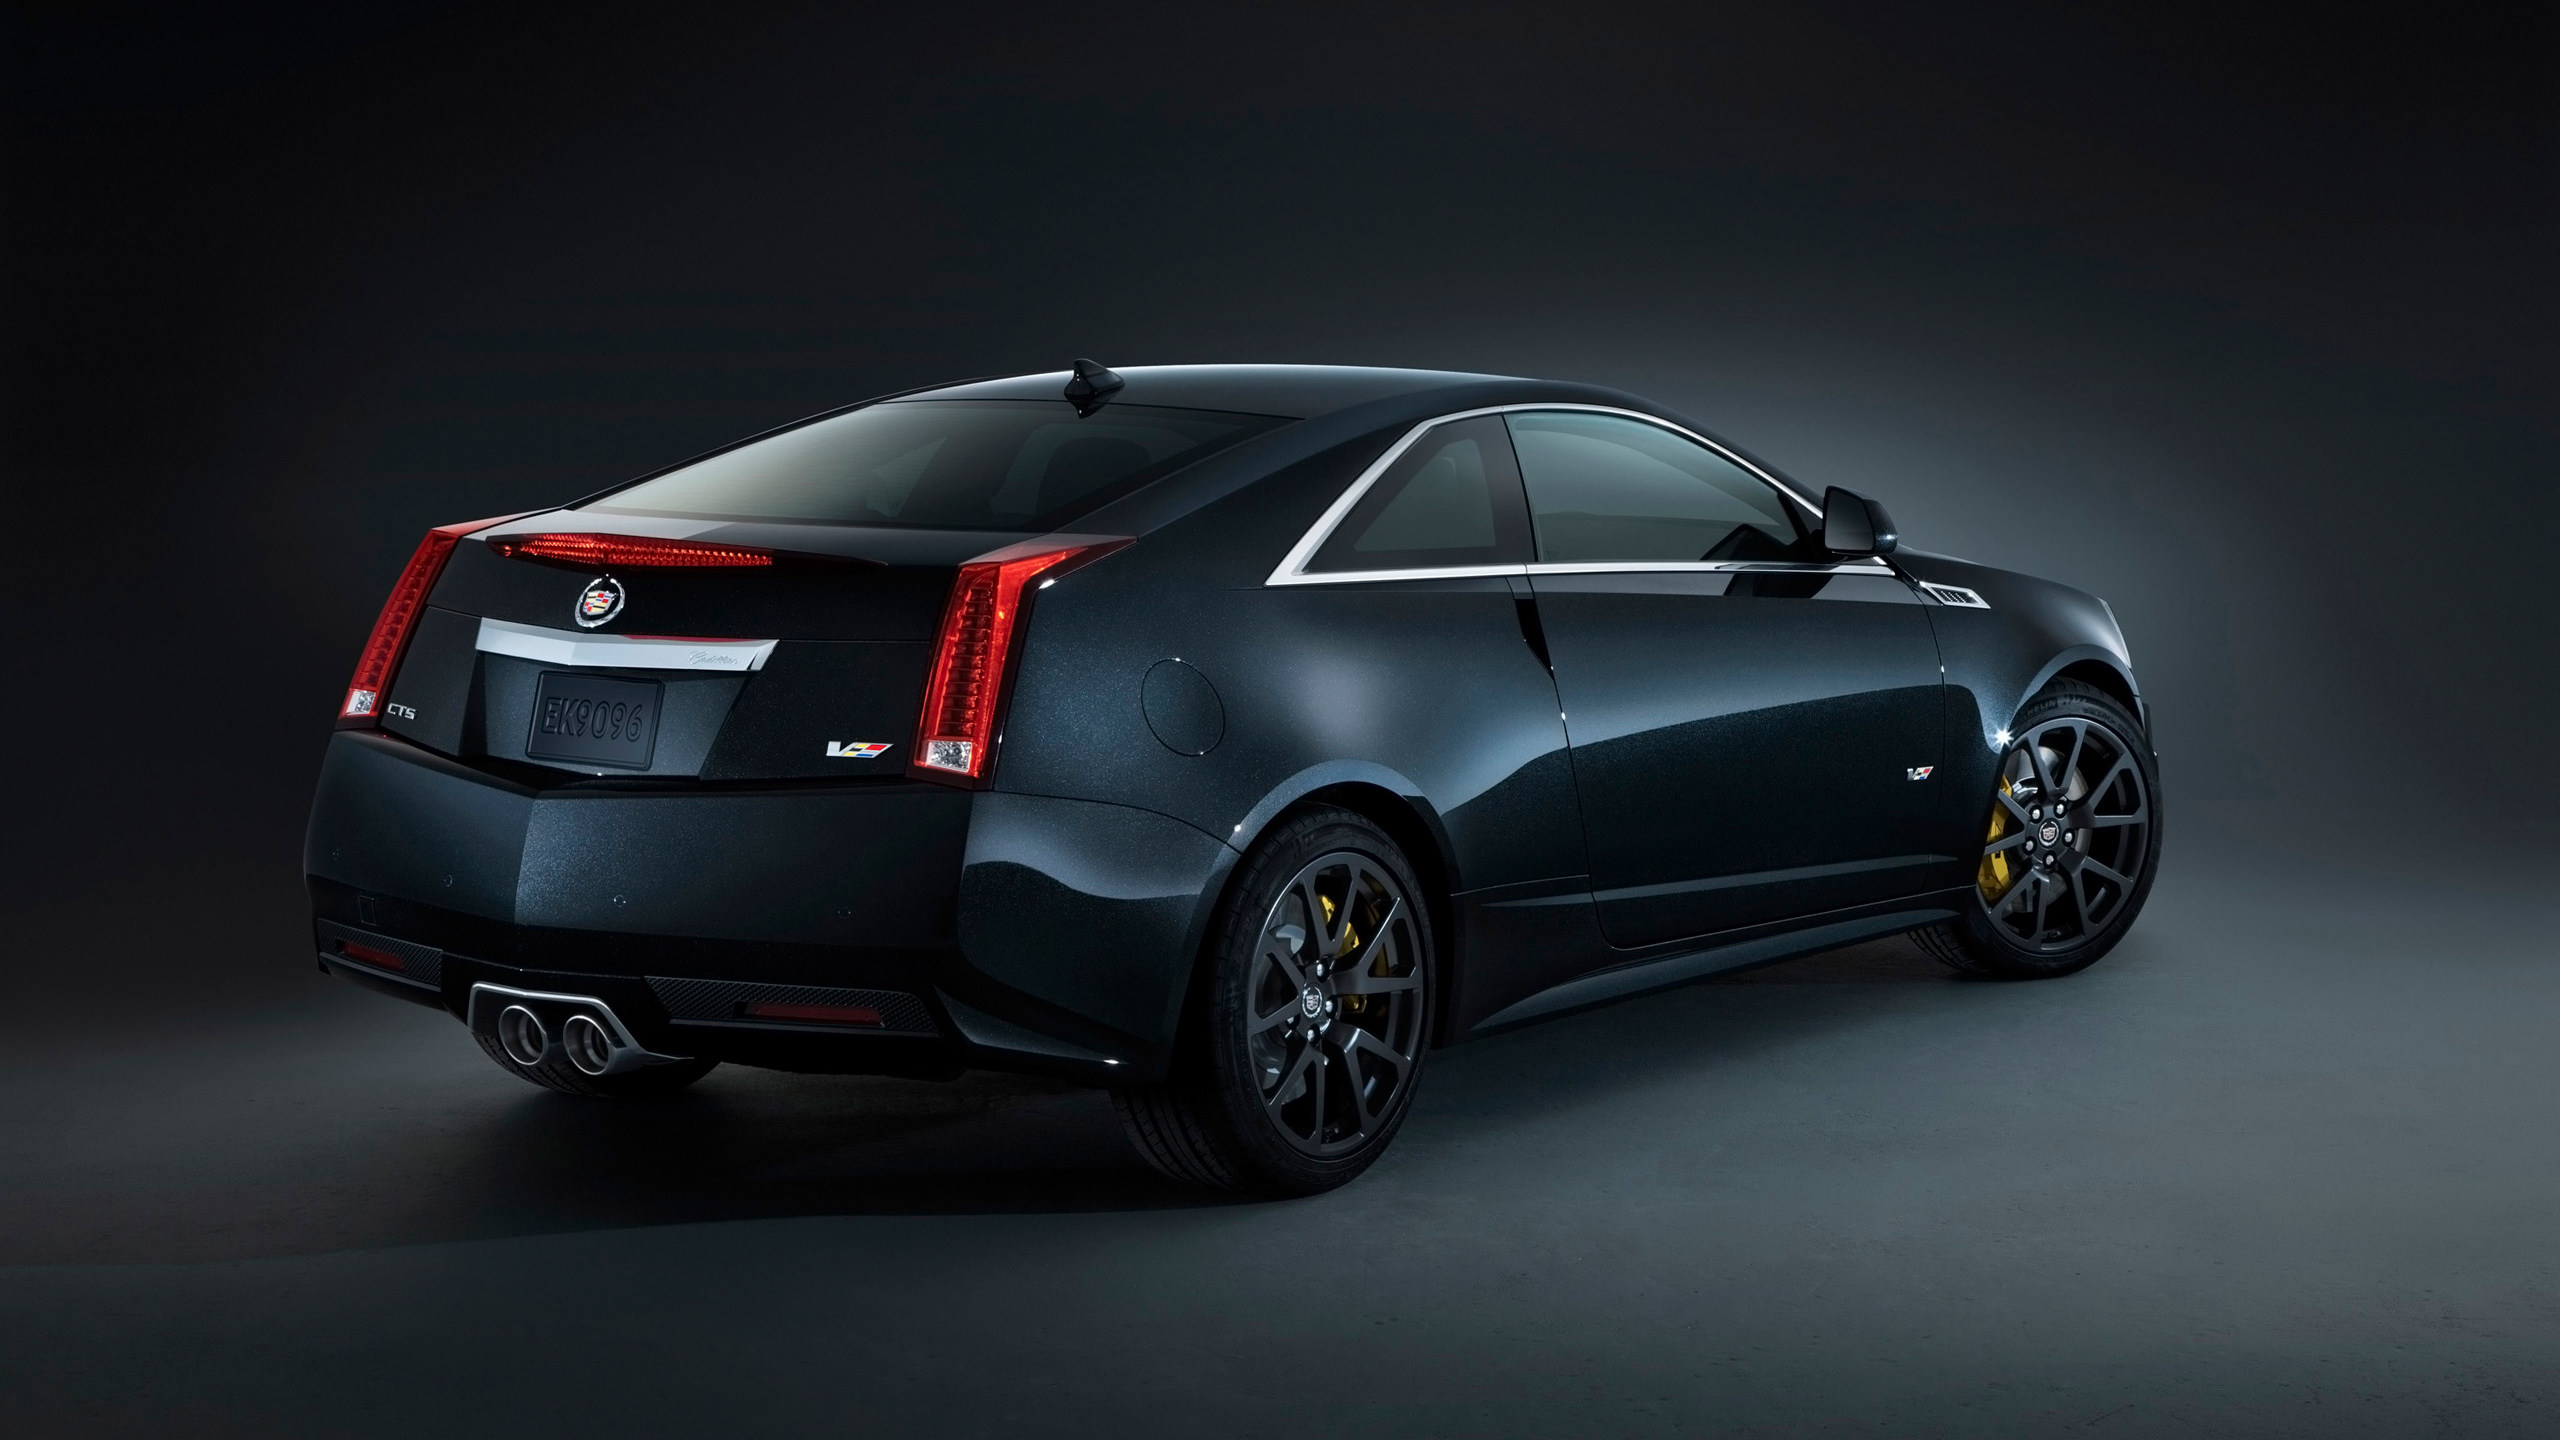 2014 Cadillac CTS V Coupe 2 Wallpaper | HD Car Wallpapers | ID #3751